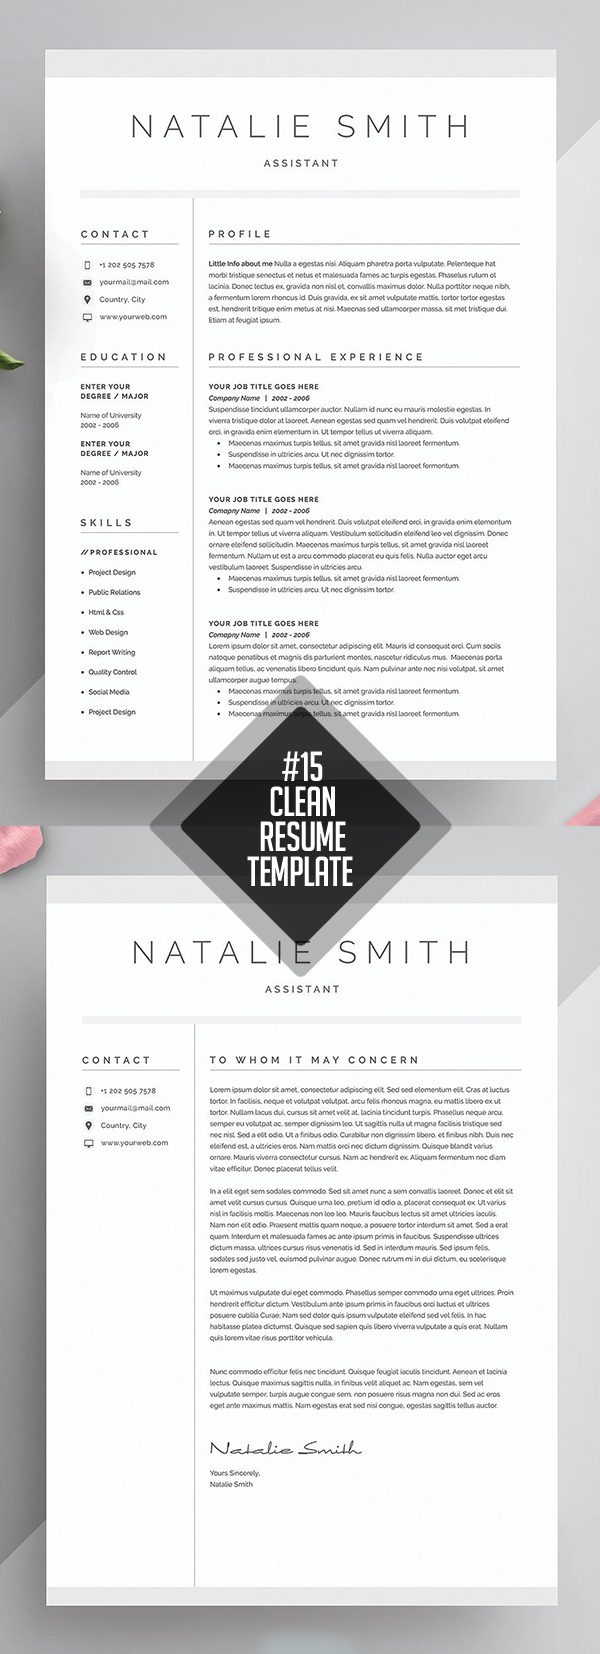 Creative Resume & Cover Letter Template